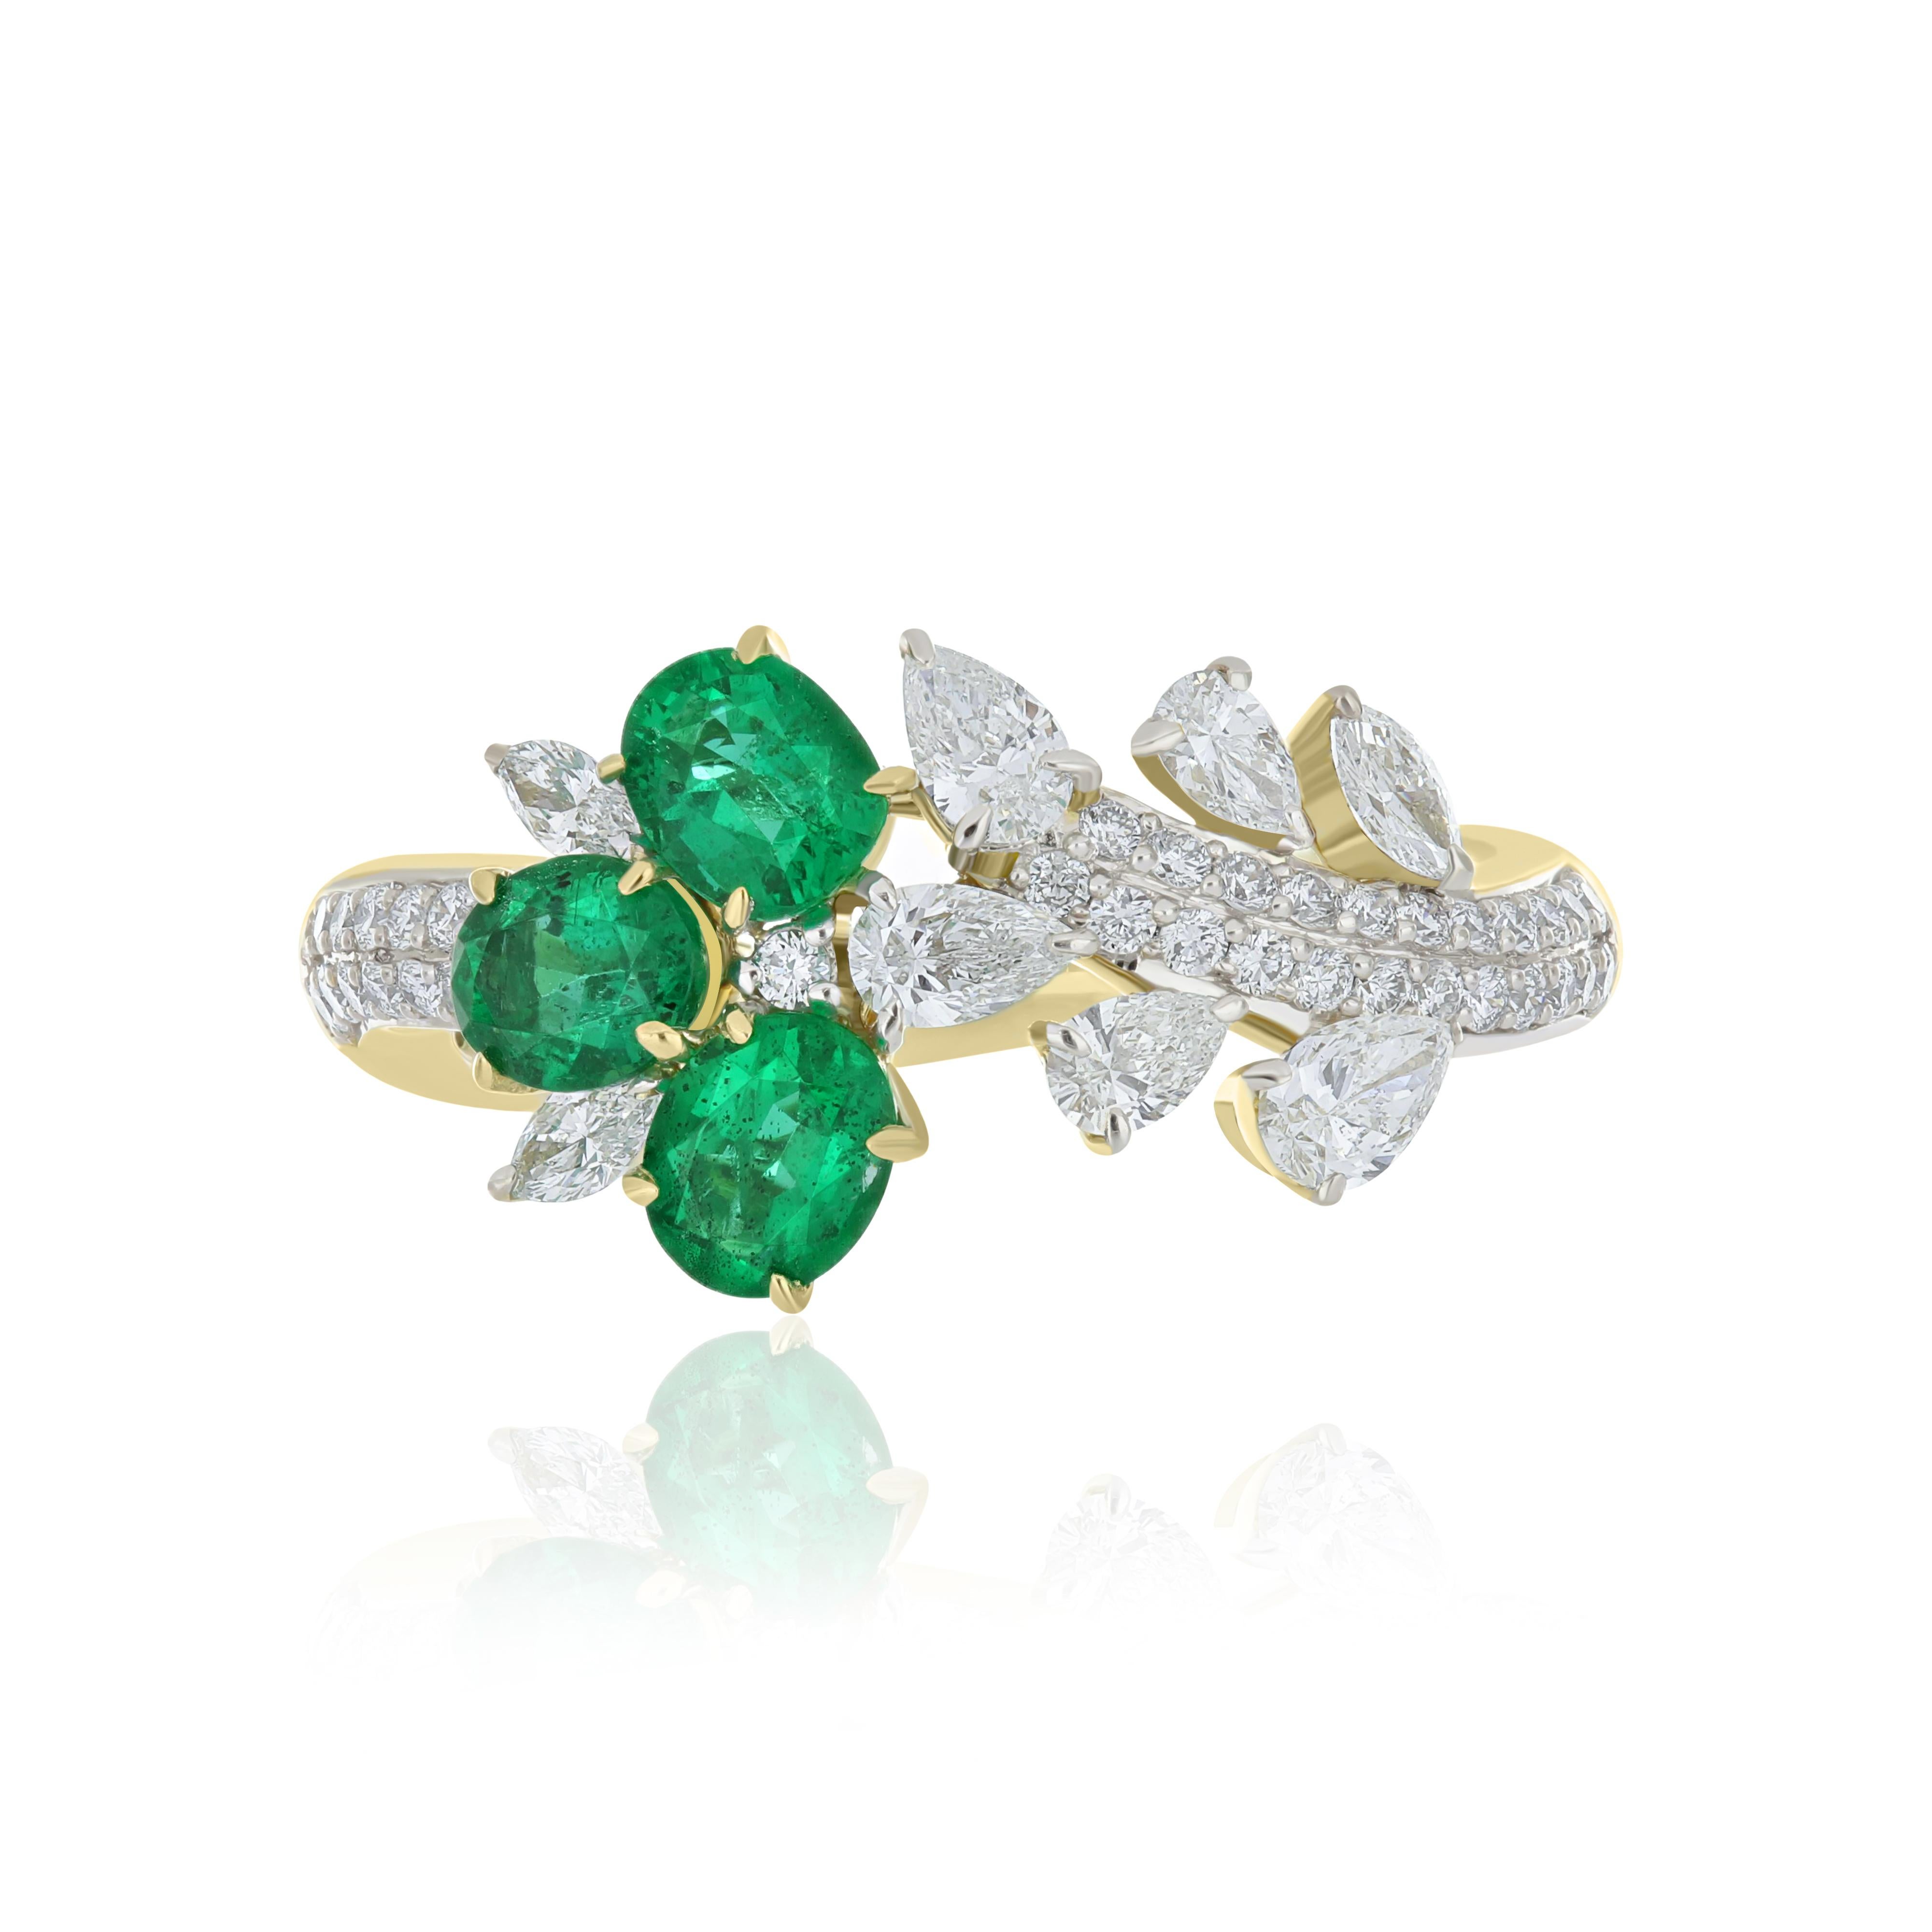 For Sale:  Emerald And Diamond Ring 18K White Gold handcraft Jewelry For Anniversary Gift 3